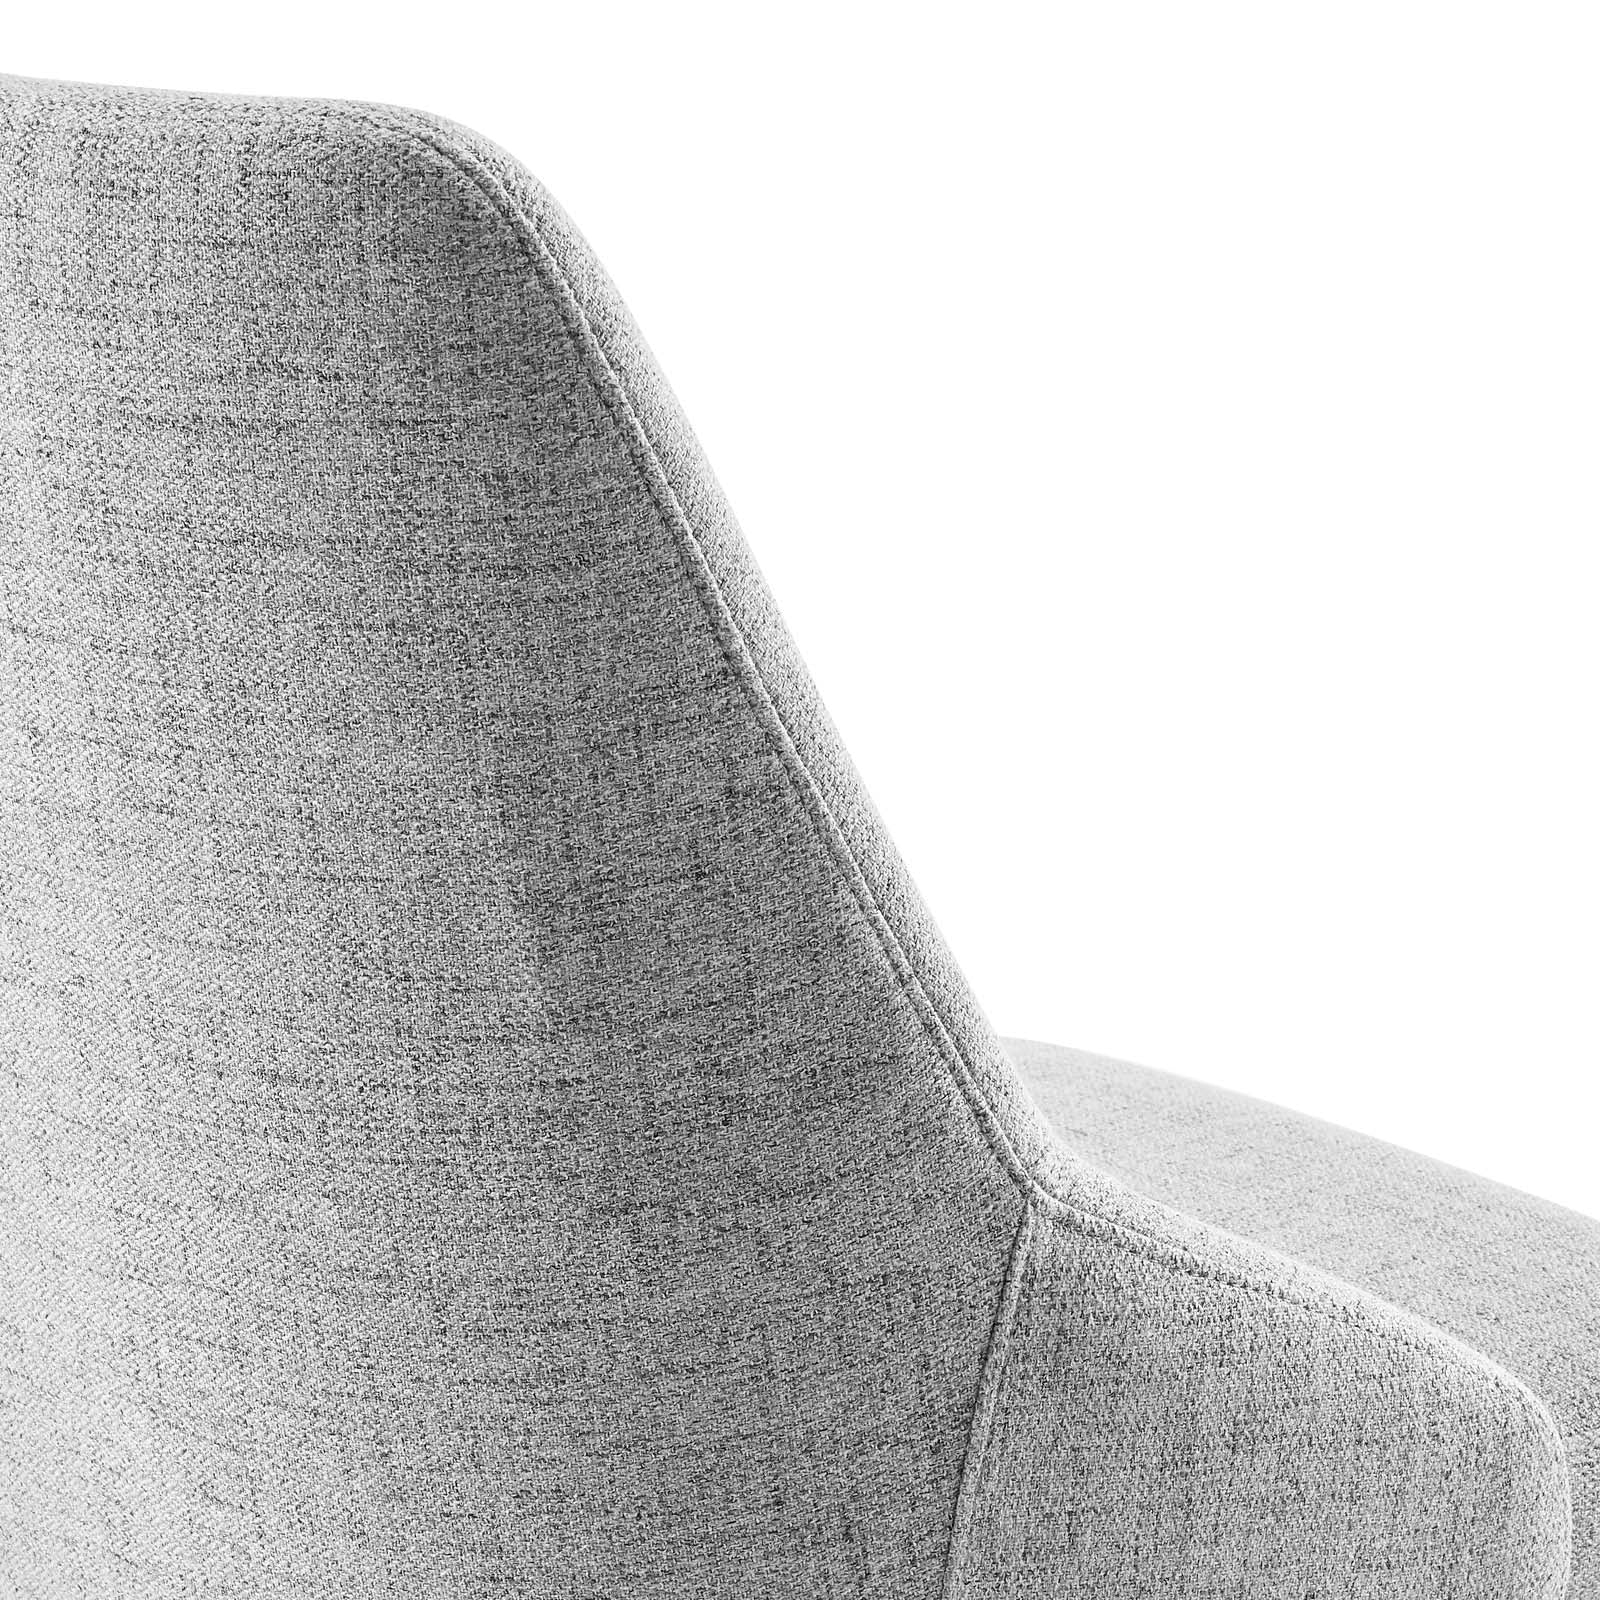 Designate Swivel Upholstered Office Chair-Desk Chair-Modway-Wall2Wall Furnishings